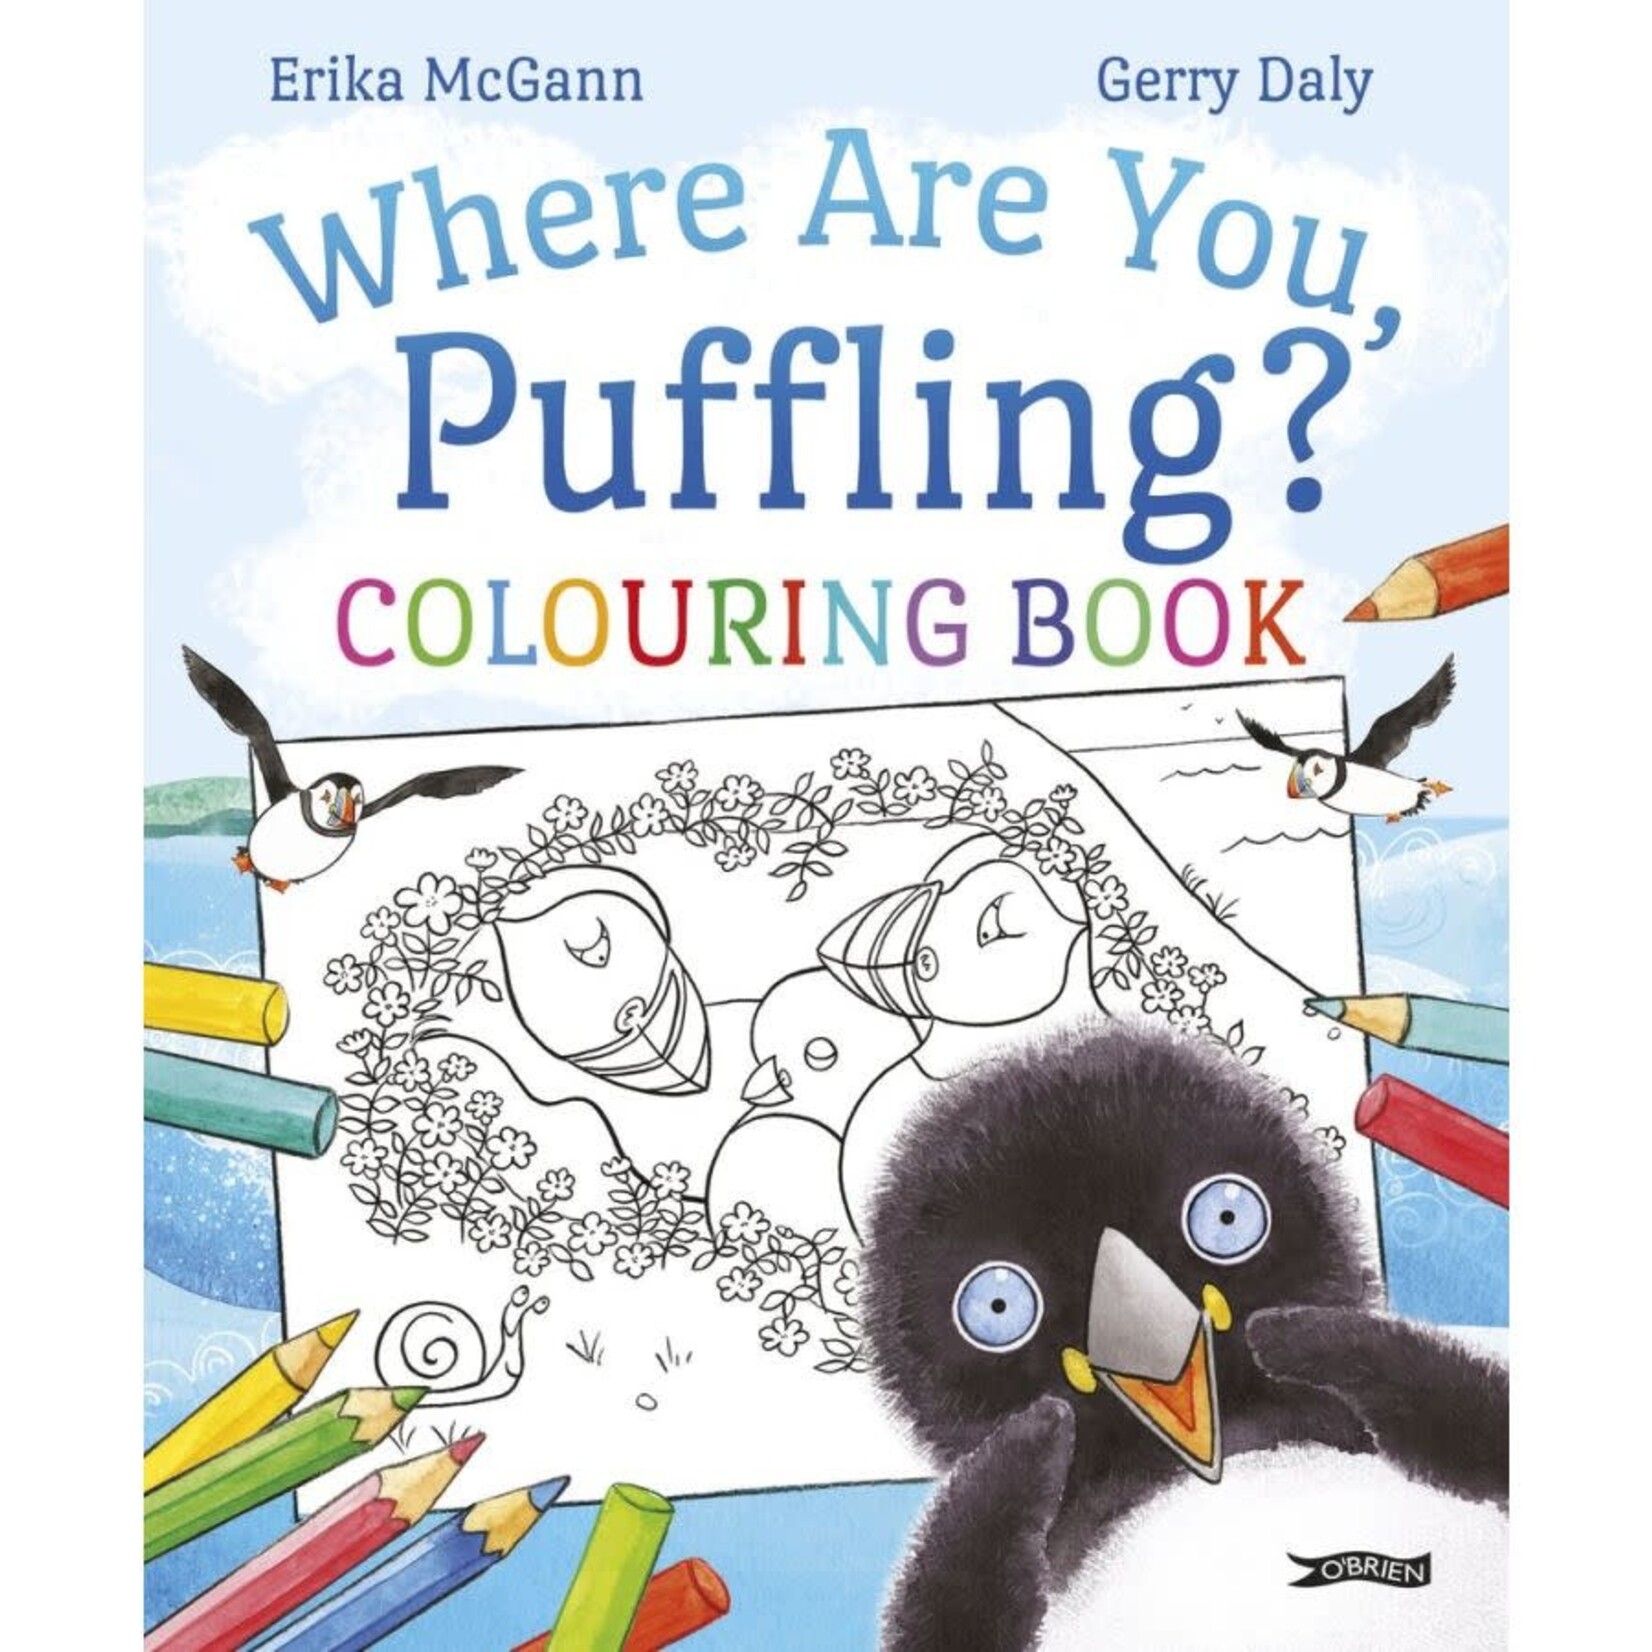 Celtic Books Where Are You, Puffling? Coloring Book